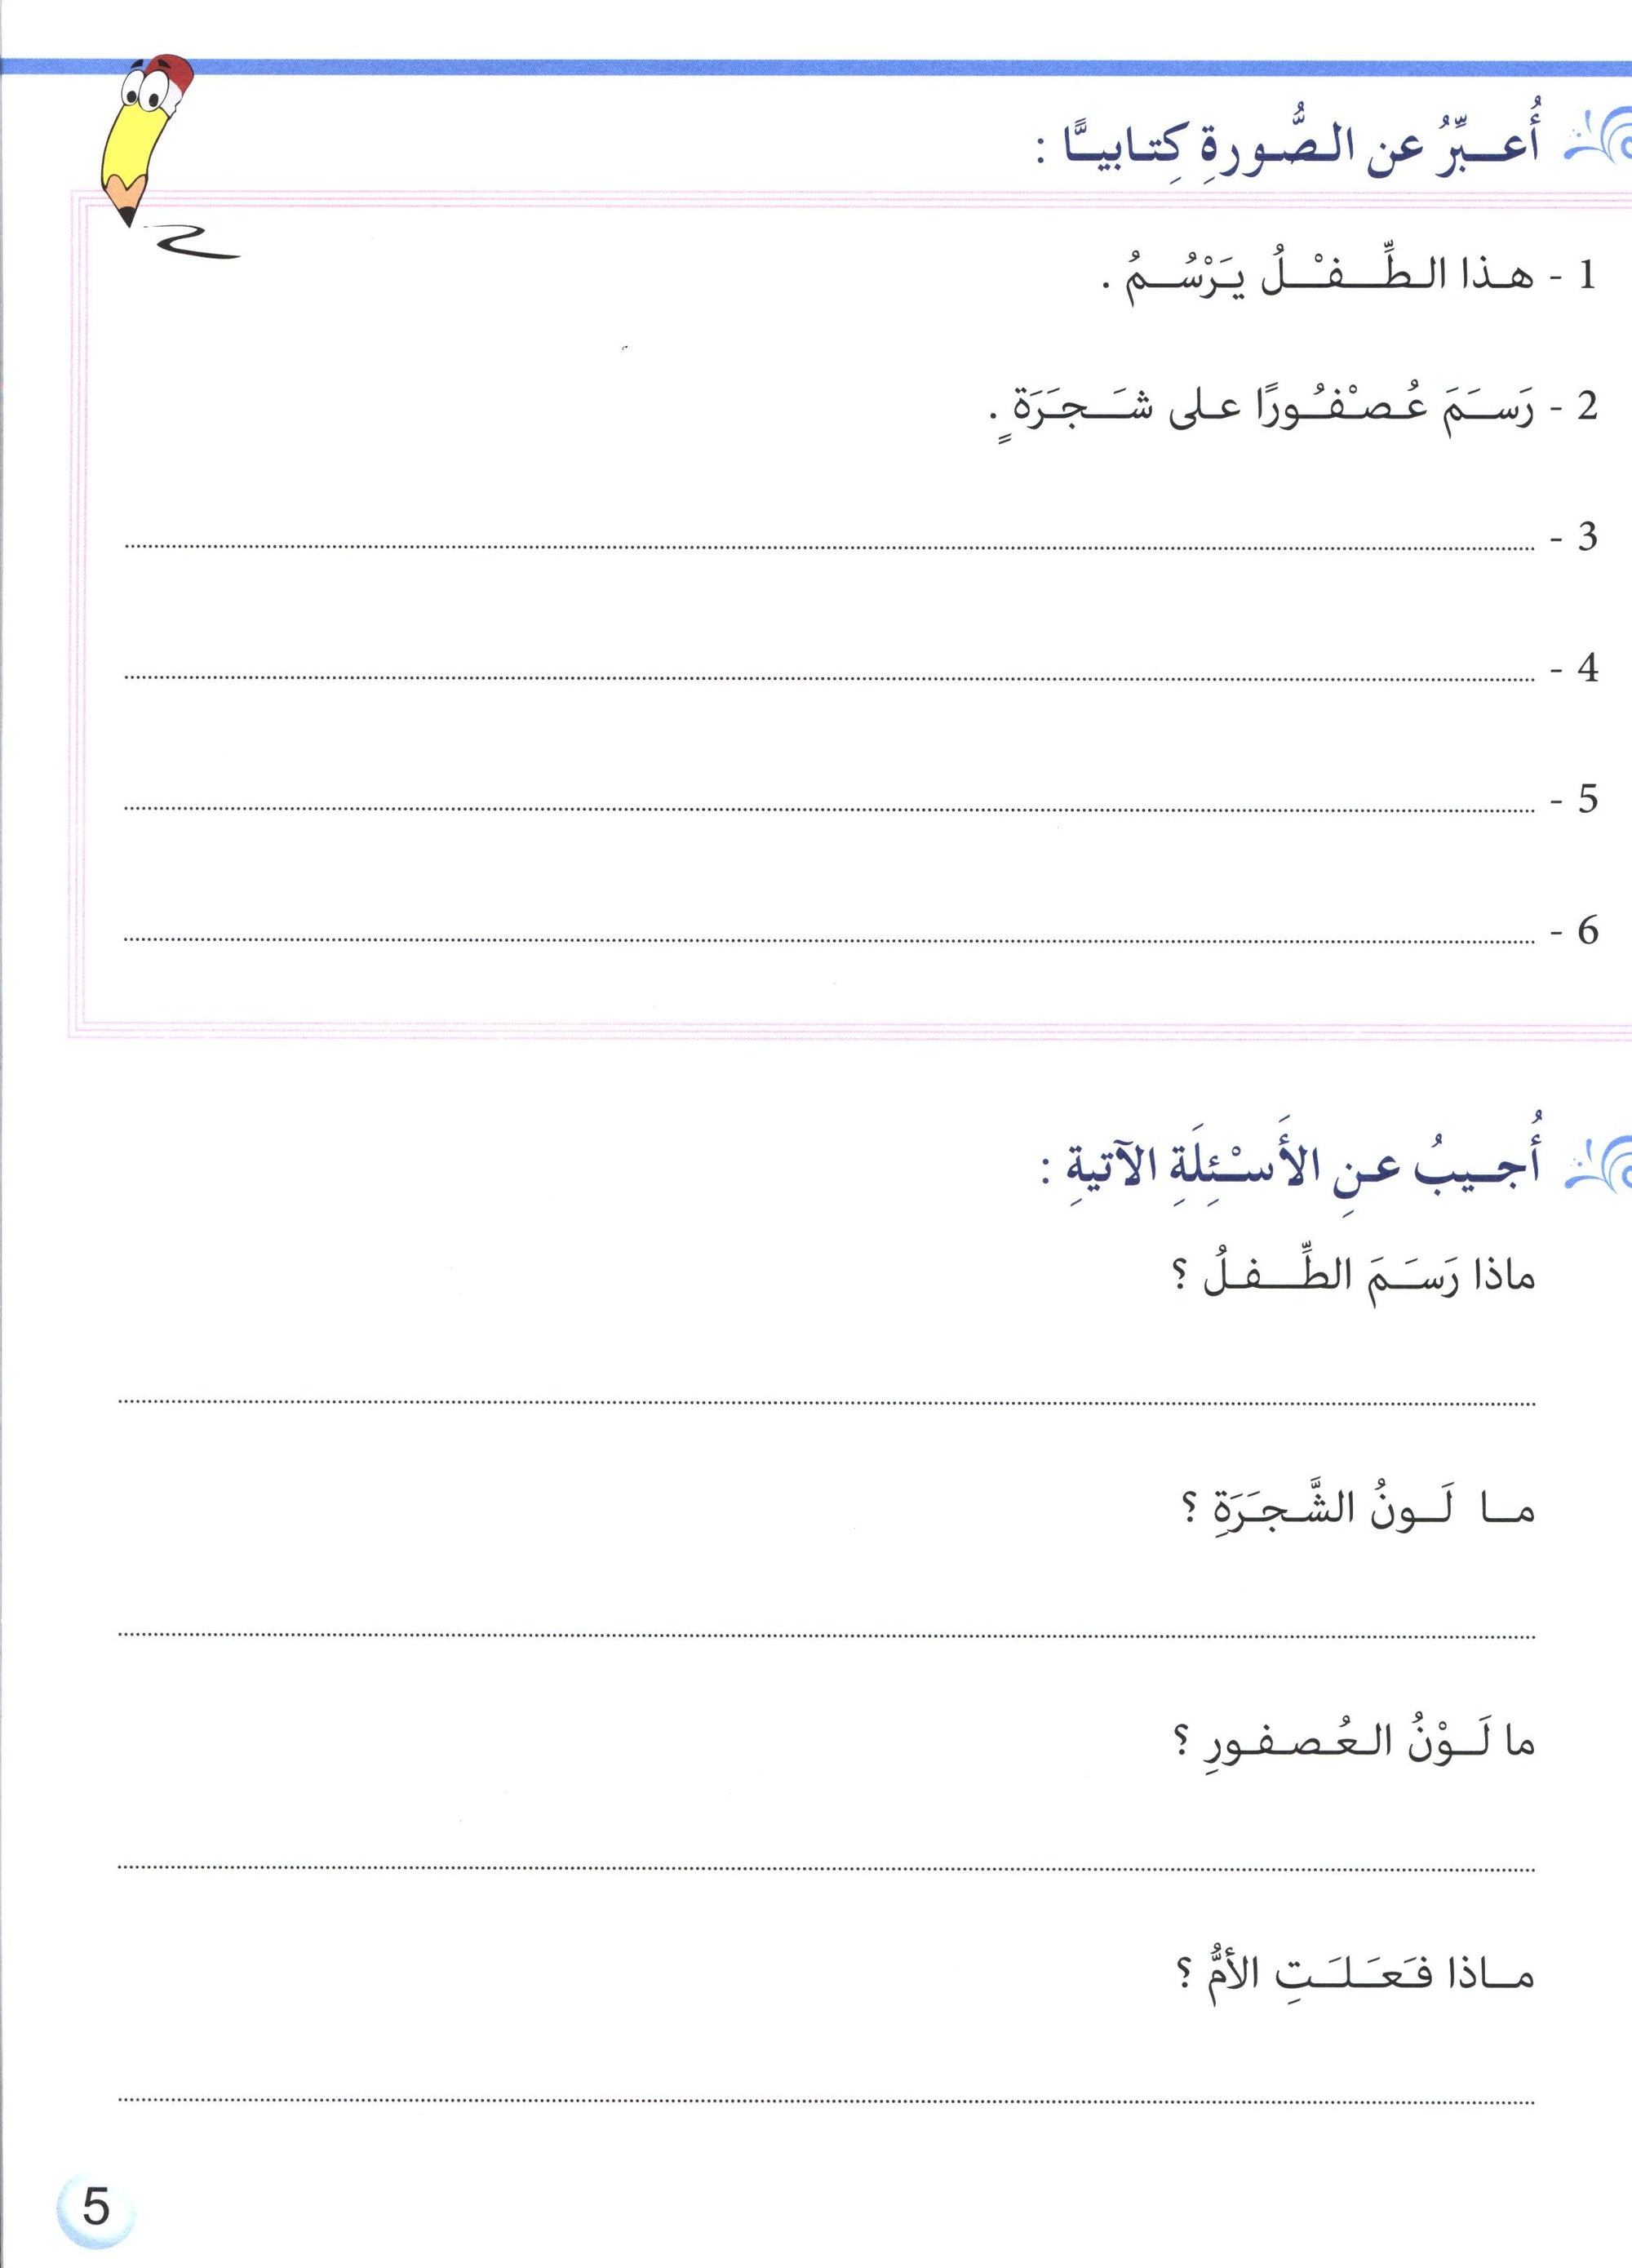 I Love My Language with CD Textbook Level 2 أحبُّ لغتي